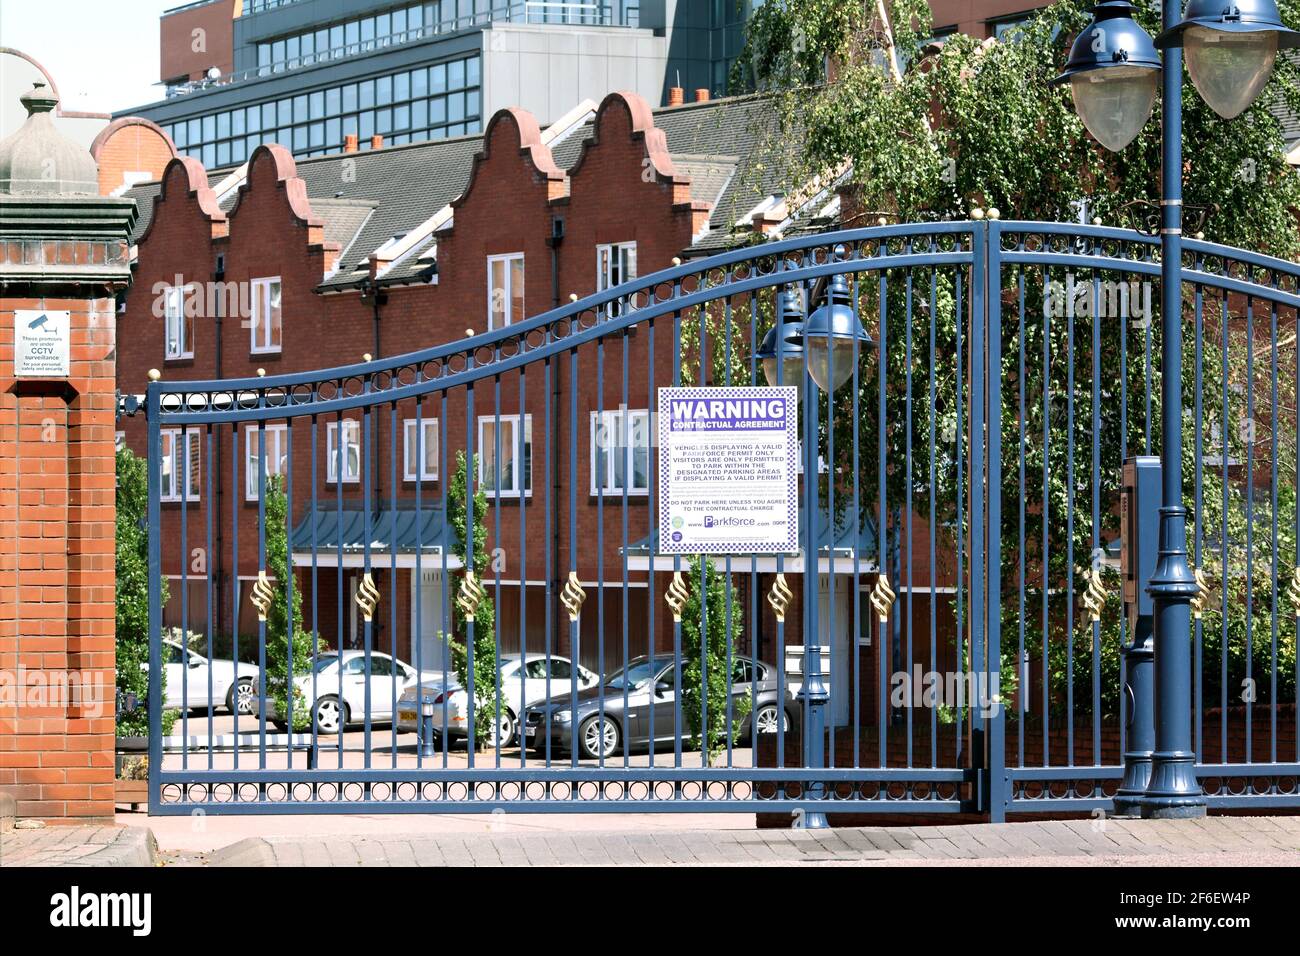 Security gates at an entrance to Symphony Court, Birmingham, a gated community of new houses and flats near the city centre. Stock Photo